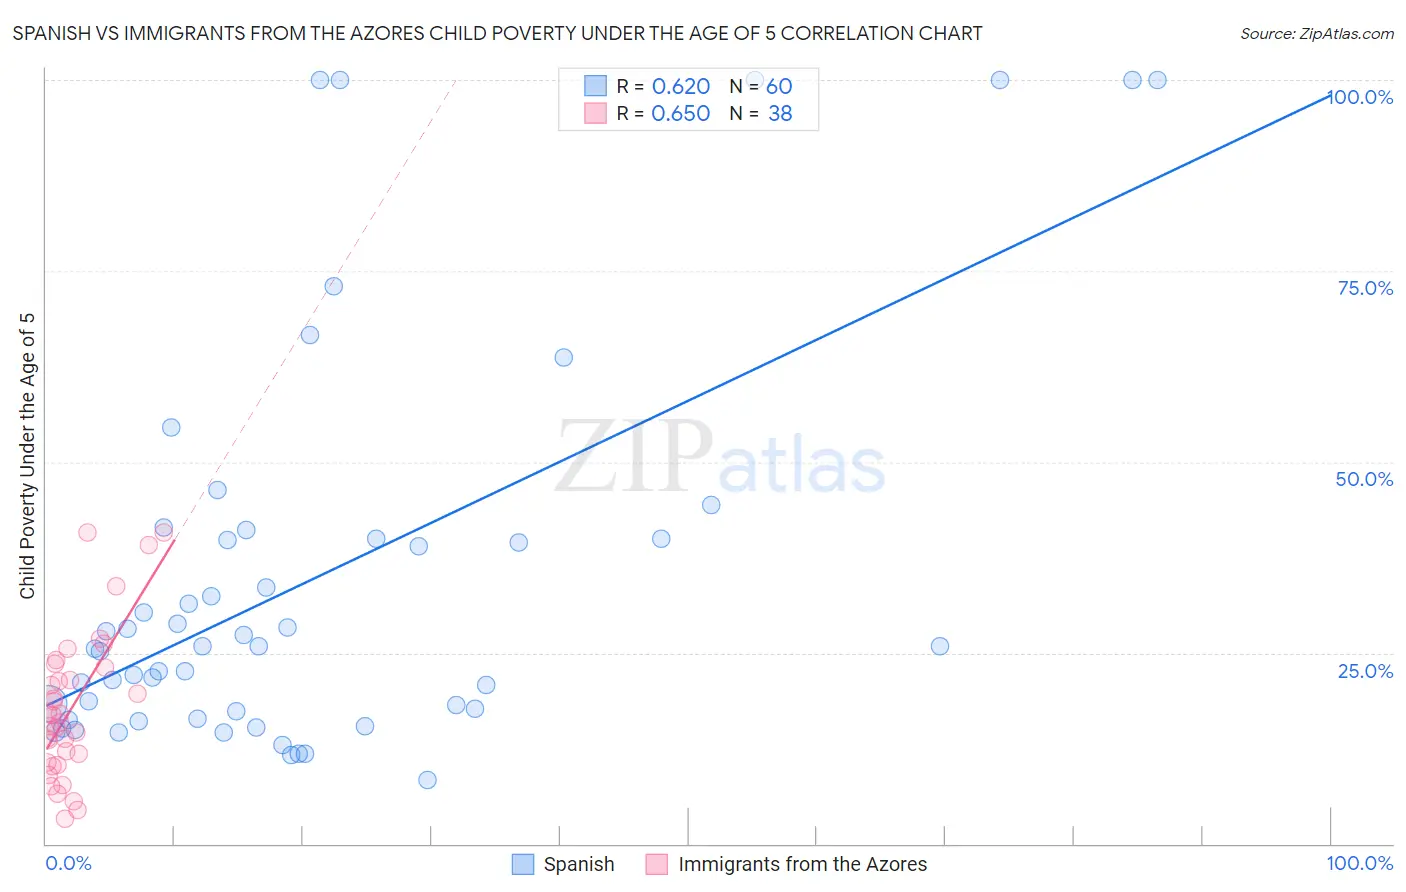 Spanish vs Immigrants from the Azores Child Poverty Under the Age of 5